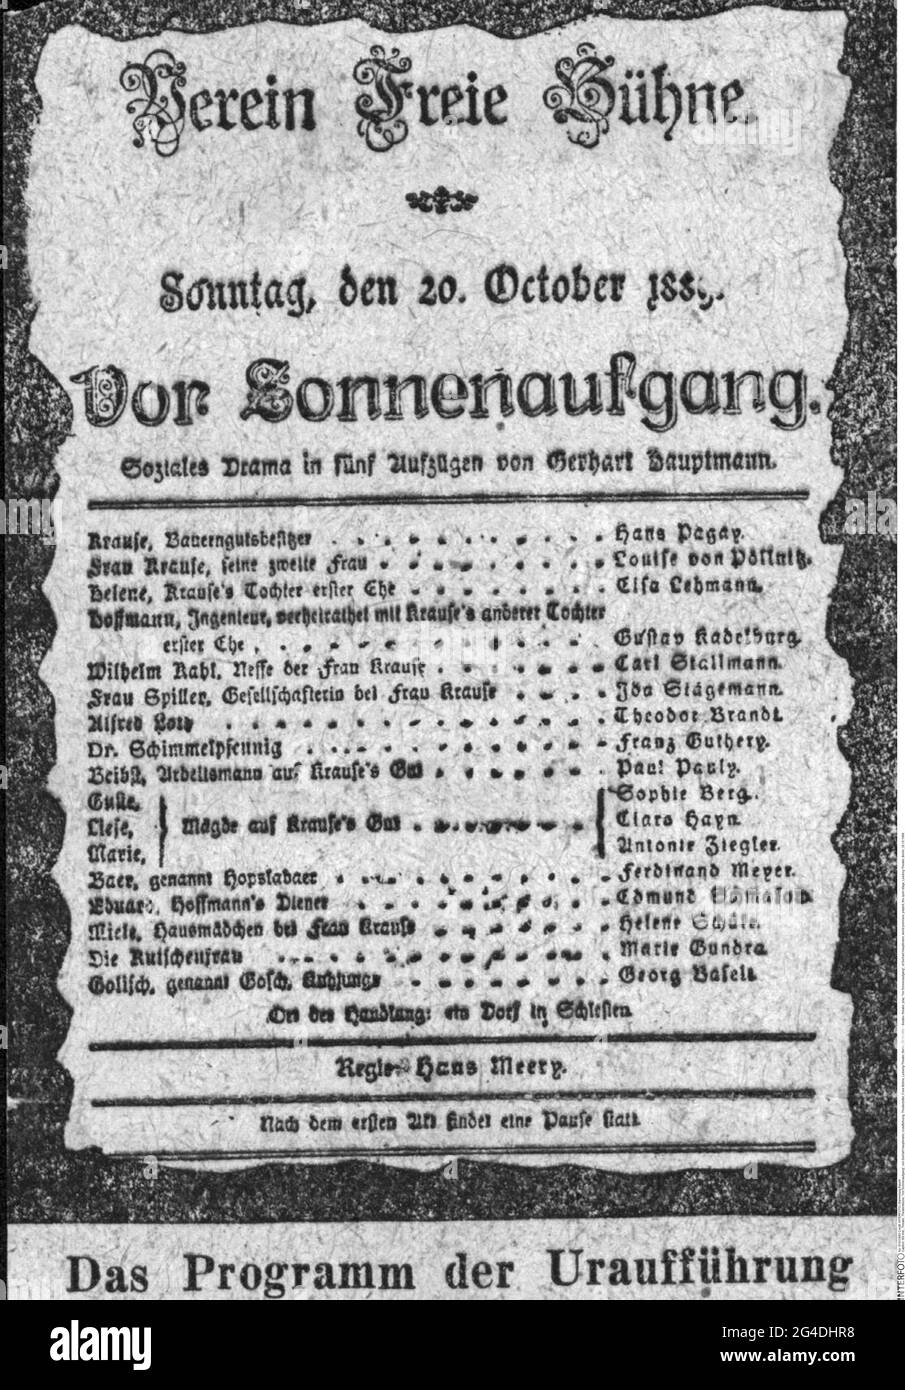 theatre / theater, play, 'Vor Sonnenaufgang', of Gerhart Hauptmann, world premiere, playbill, ARTIST'S COPYRIGHT HAS NOT TO BE CLEARED Stock Photo